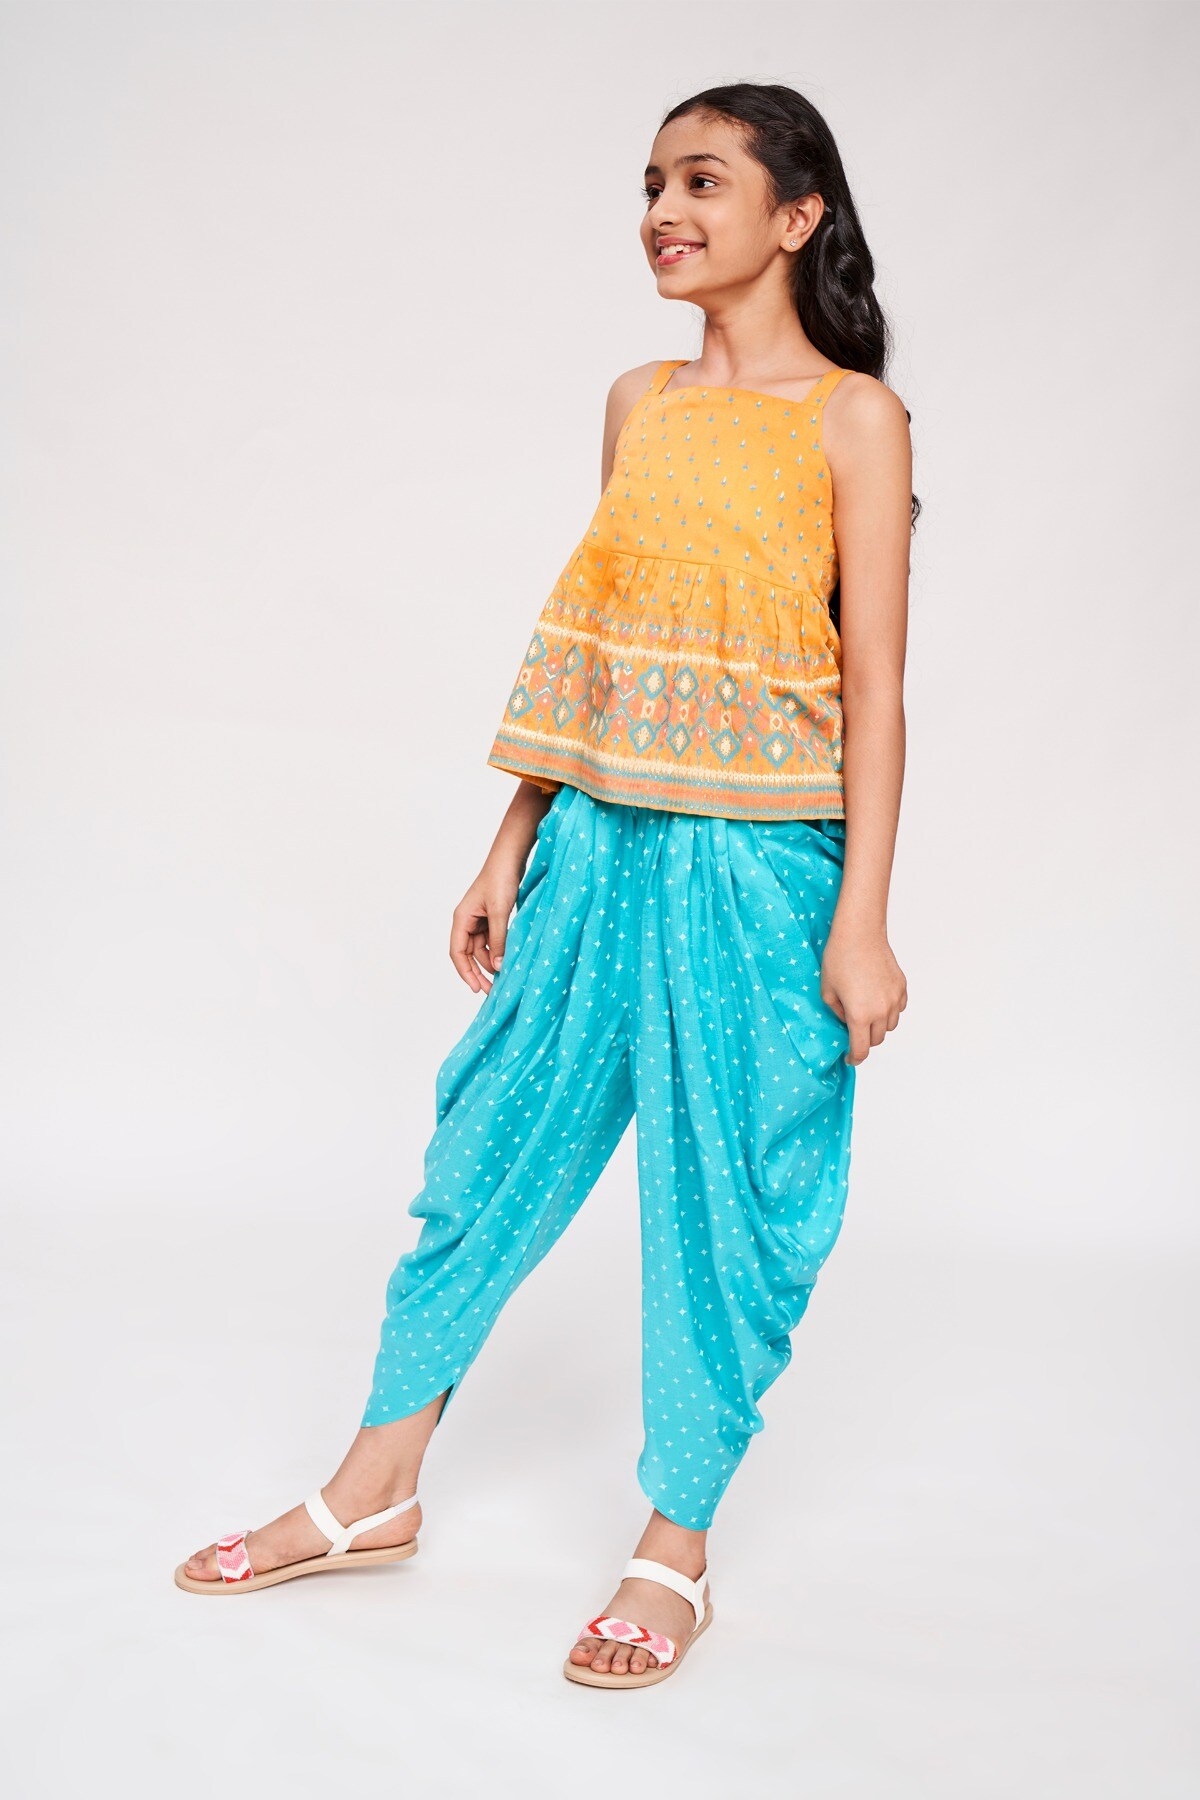 Global Desi | Orange And Blue Ethnic Motifs Printed Fit And Flare Suit 3